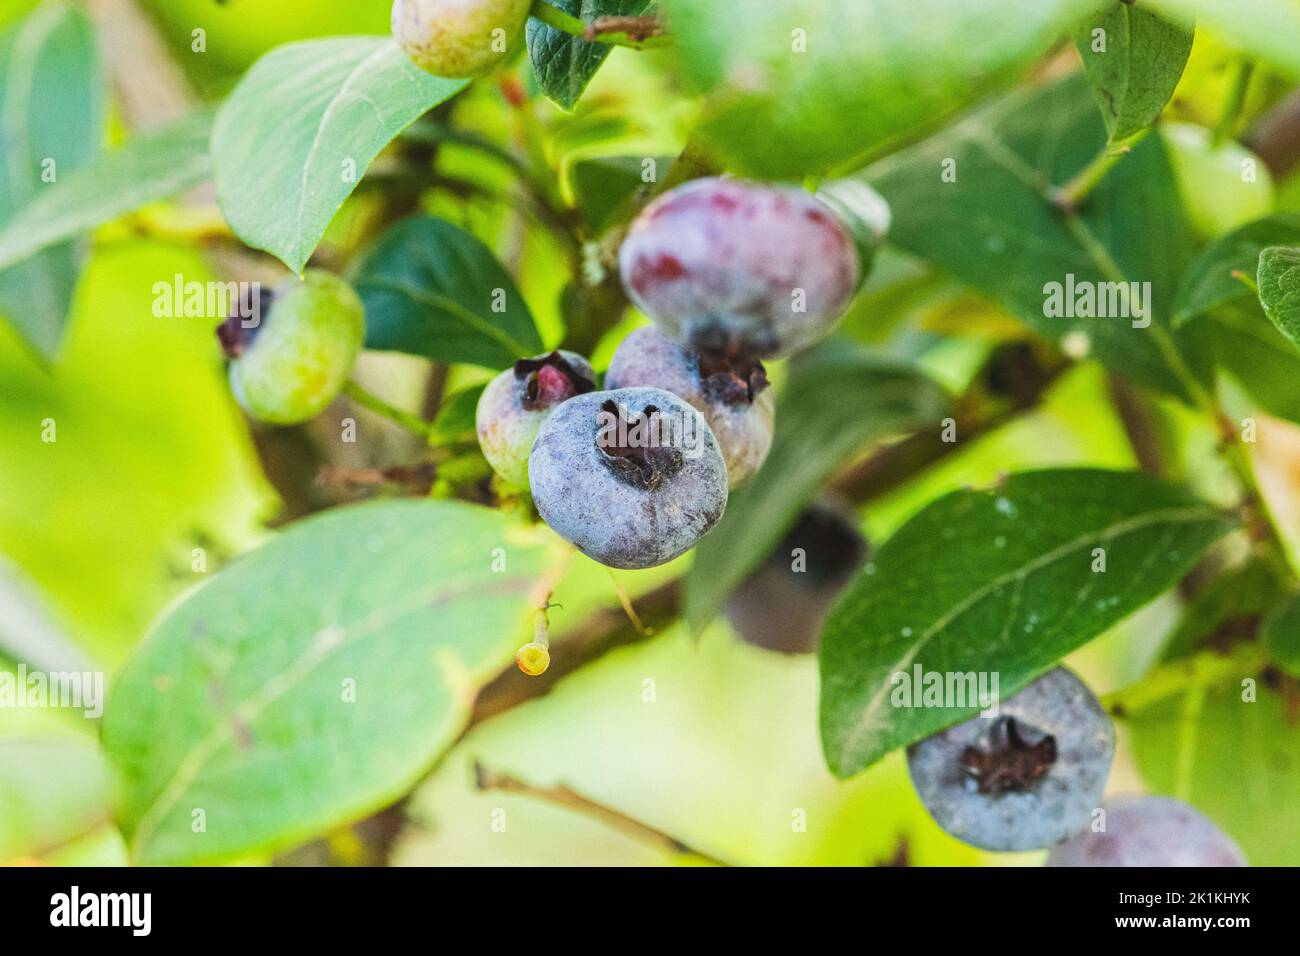 Fresh organic ripe blueberries among green leaves hanging from a bush or plant in the forest or woods in autumn, close up Stock Photo